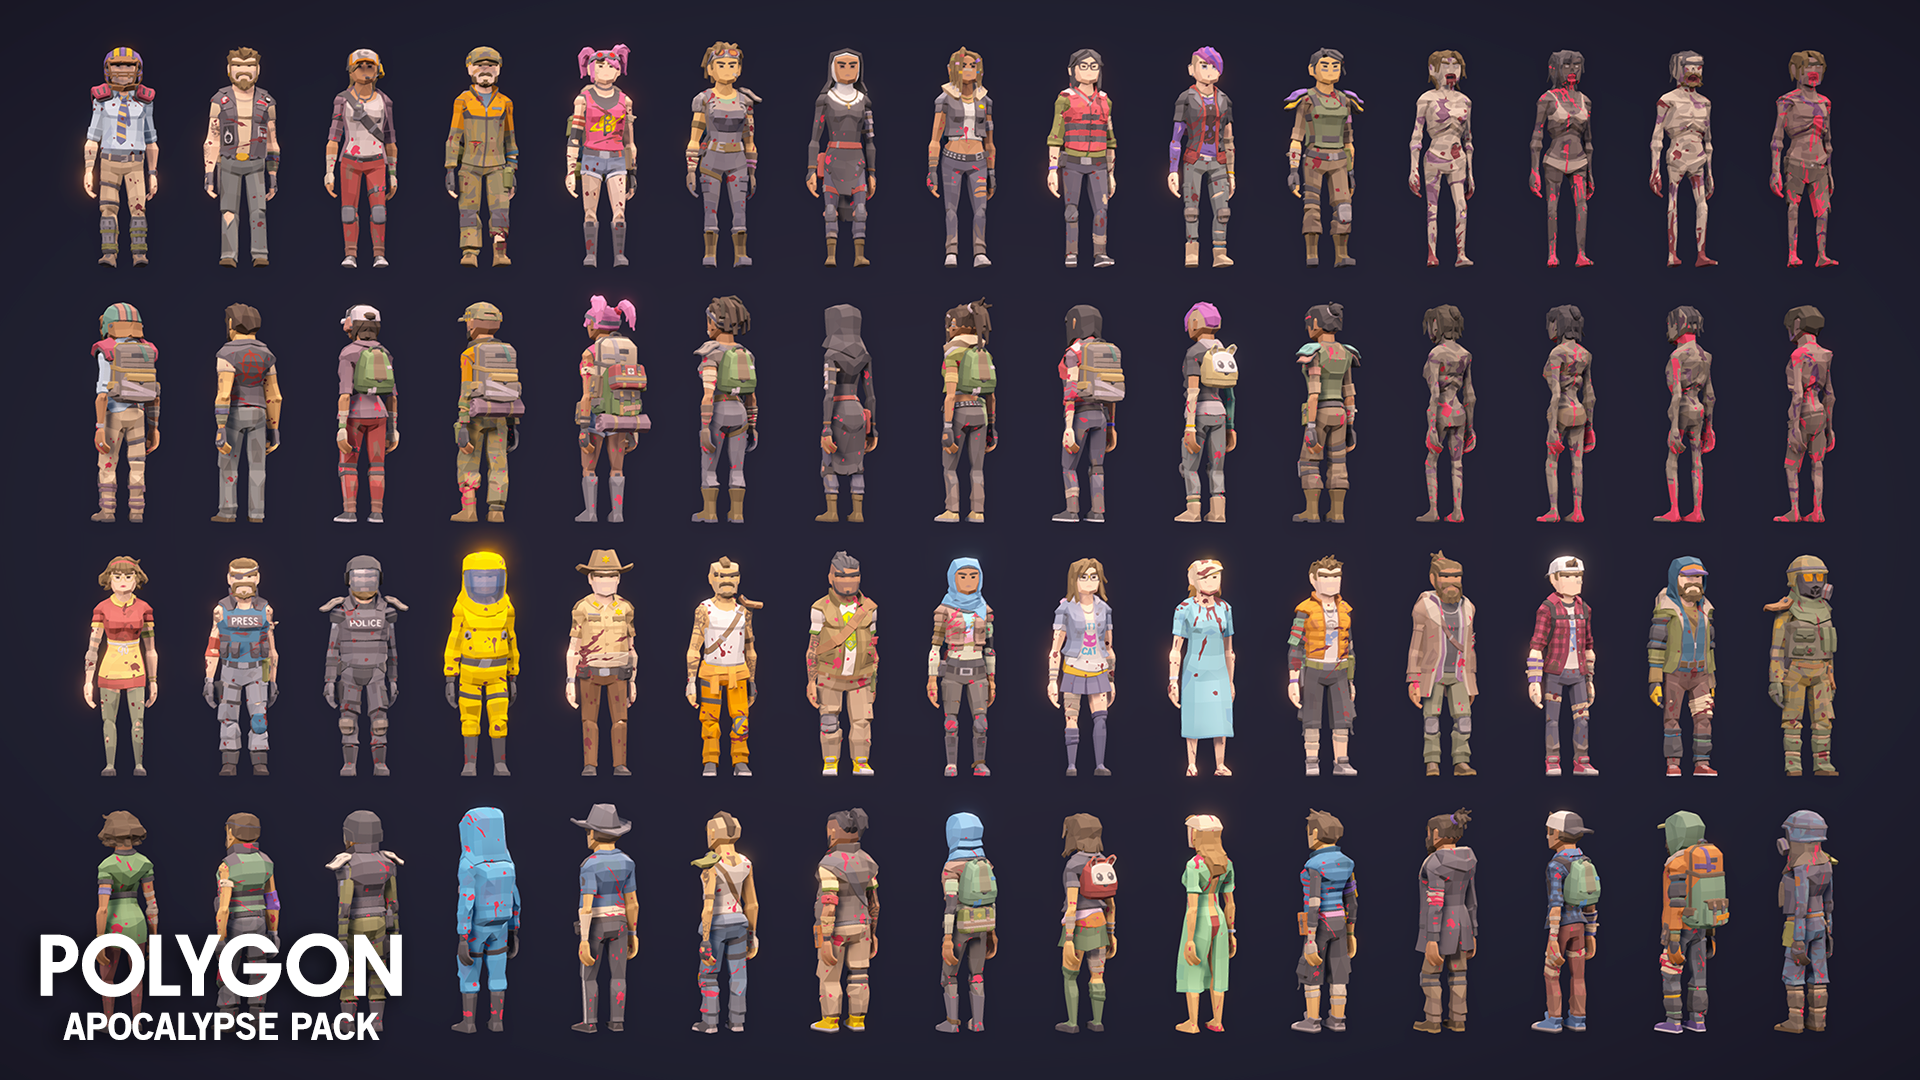 Apocalypse themed low poly character skins for game development